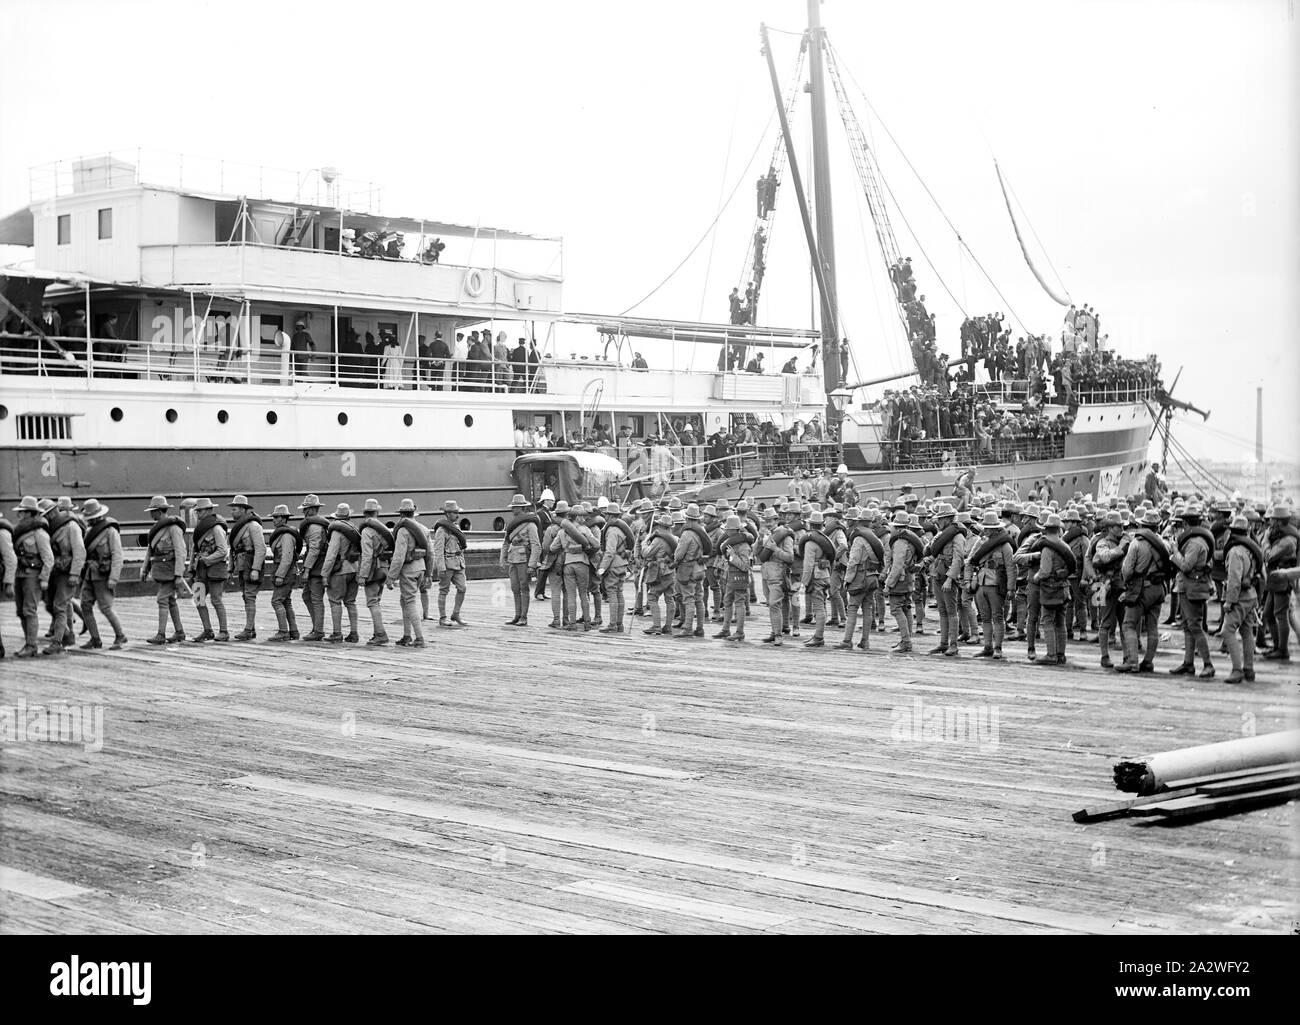 Glass Negative - Troops Embarking HMT Orient Bound for Boer War, Melbourne,  15 Feb 1901, Troops embarking a ship in Melbourne, bound for the Boer War,  probably on 15 February 1901. The